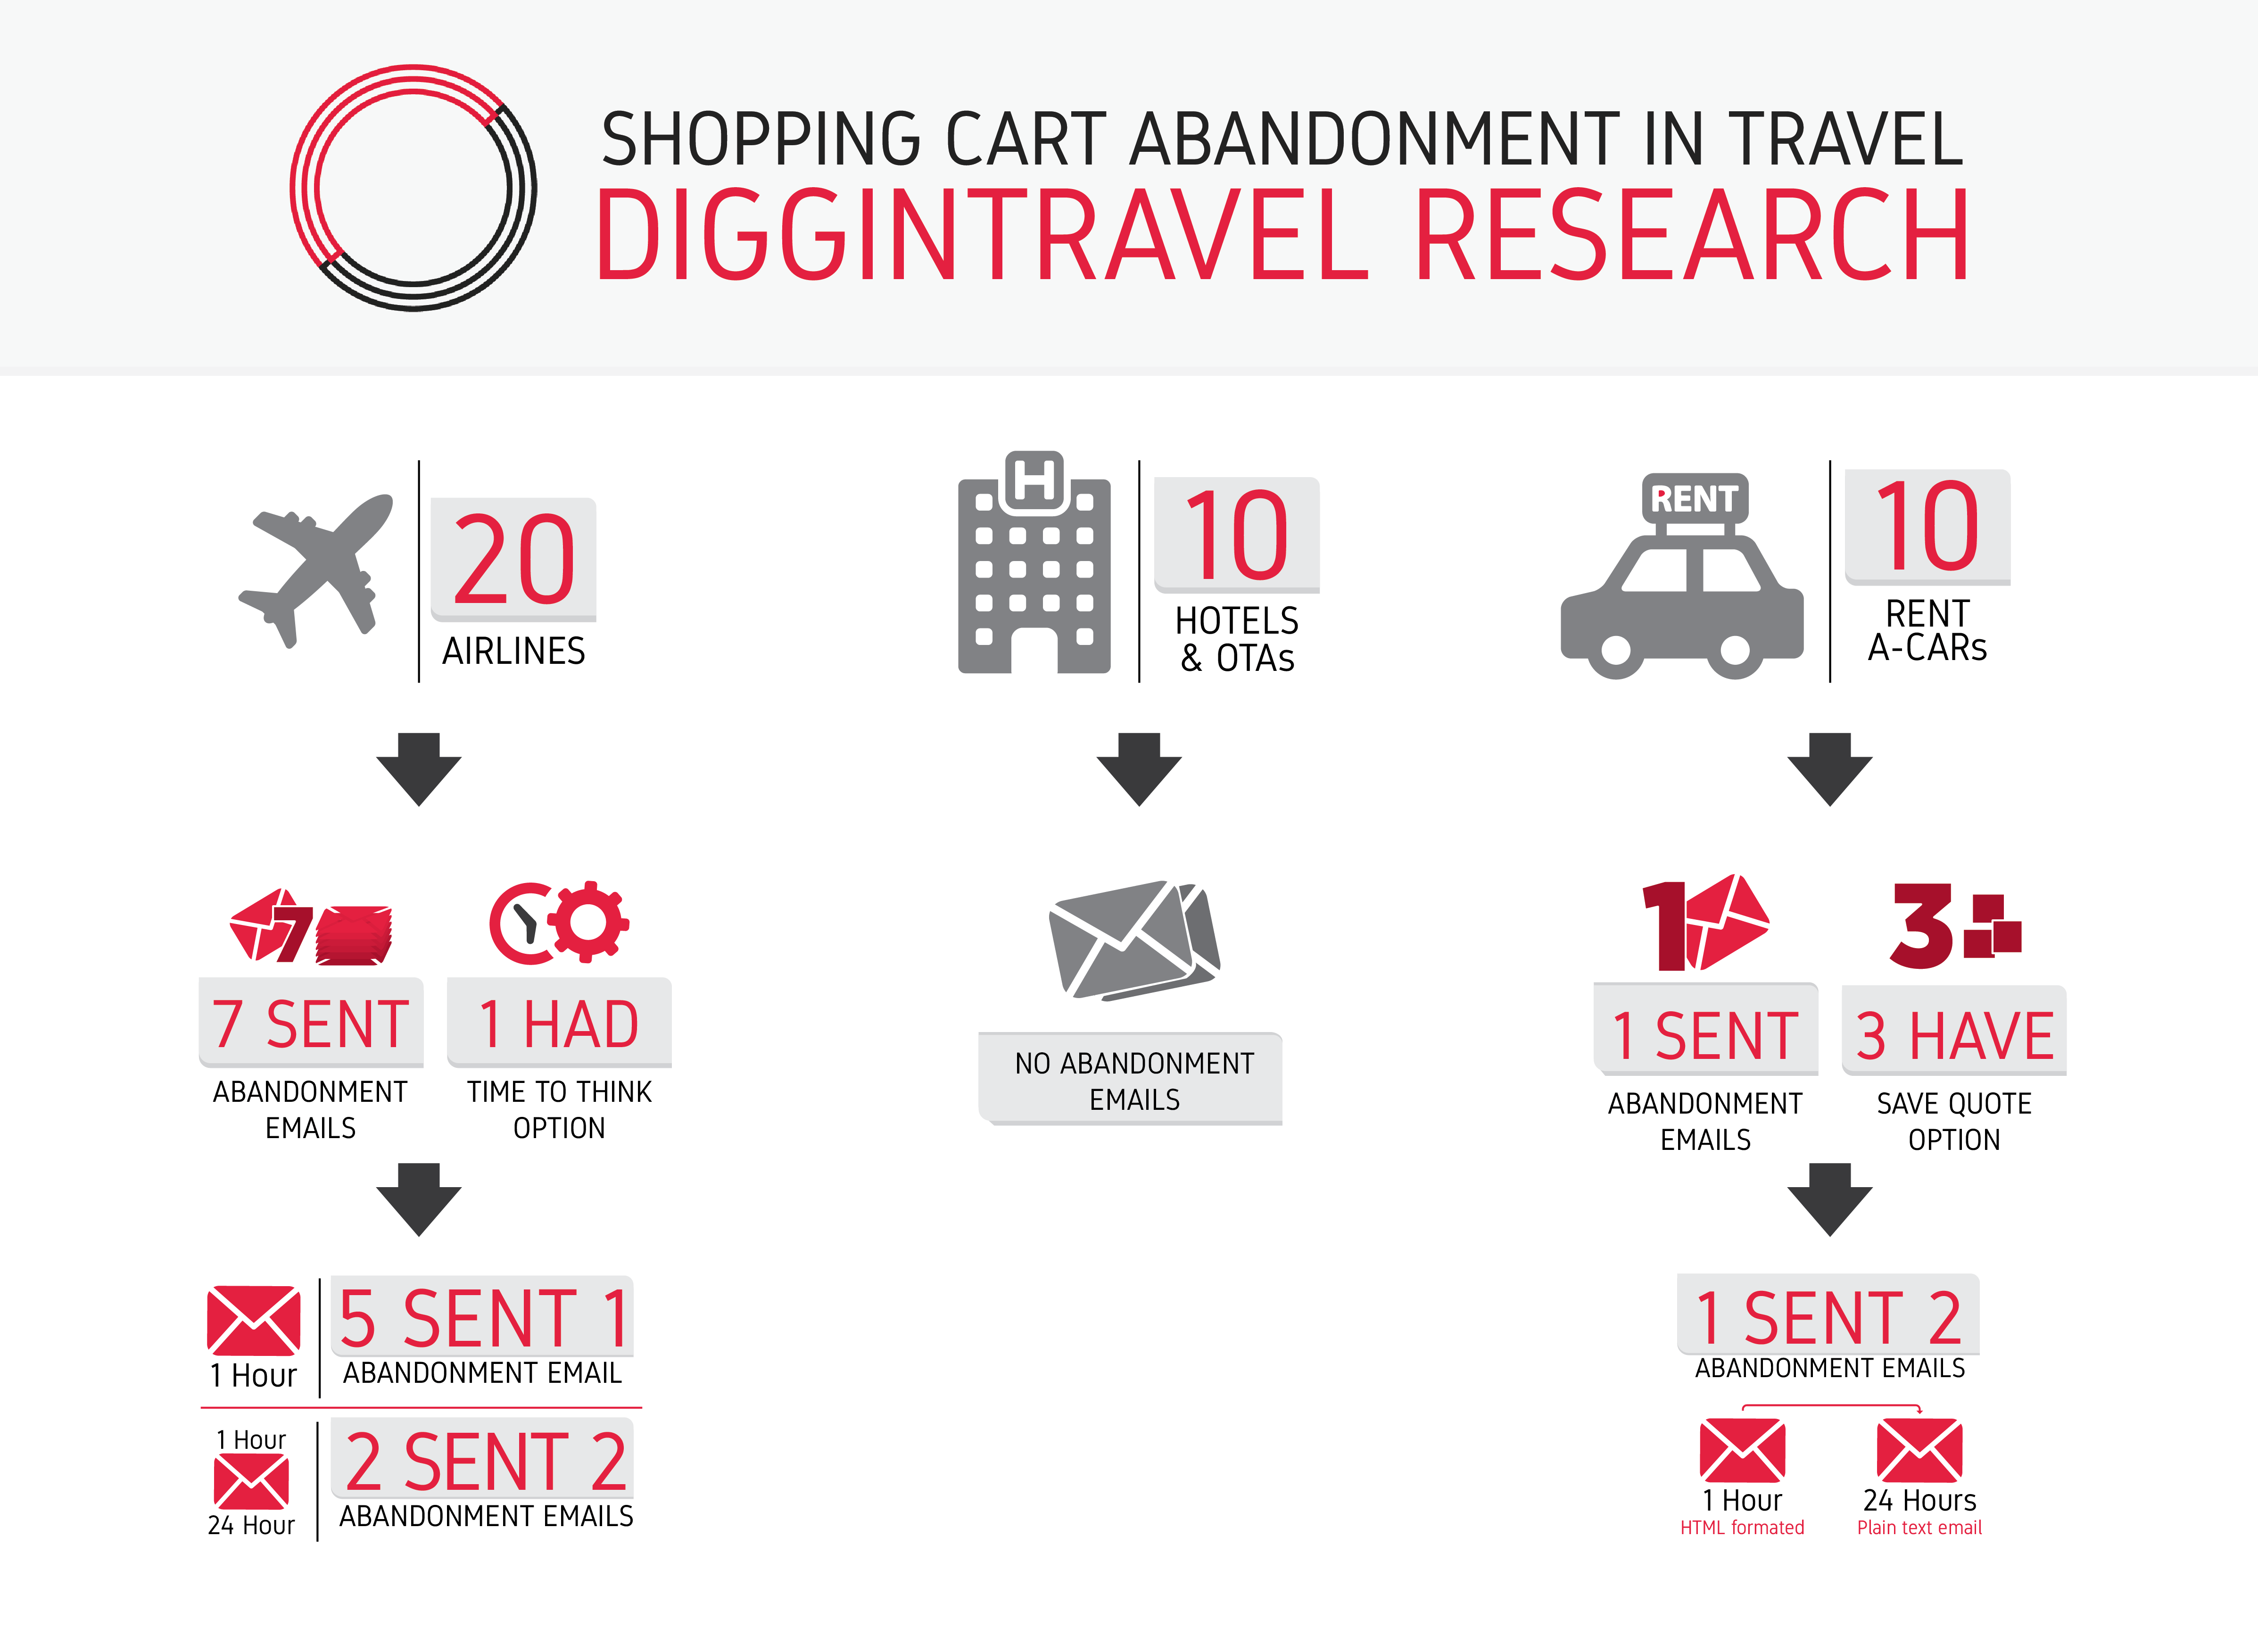 Results of Diggintravel shopping cart abandonment in the travel industry